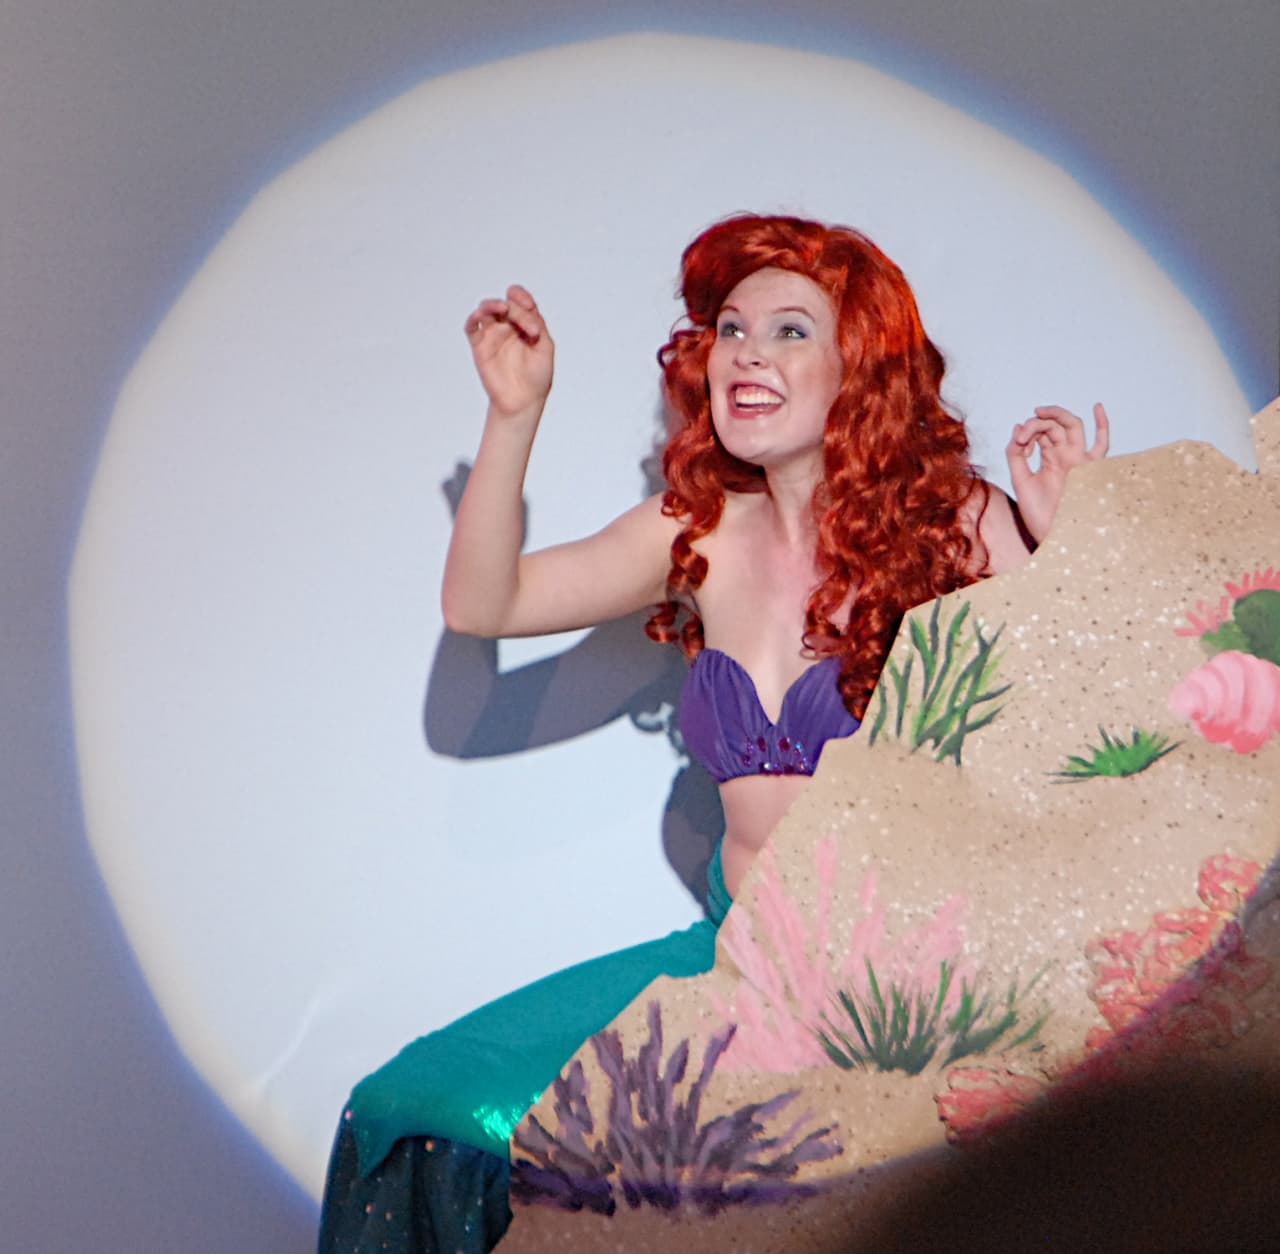 Sarah Mae Banning will be portraying Ariel for the Summer Theatre of New Canaan's production of "The Little Mermaid Jr." 